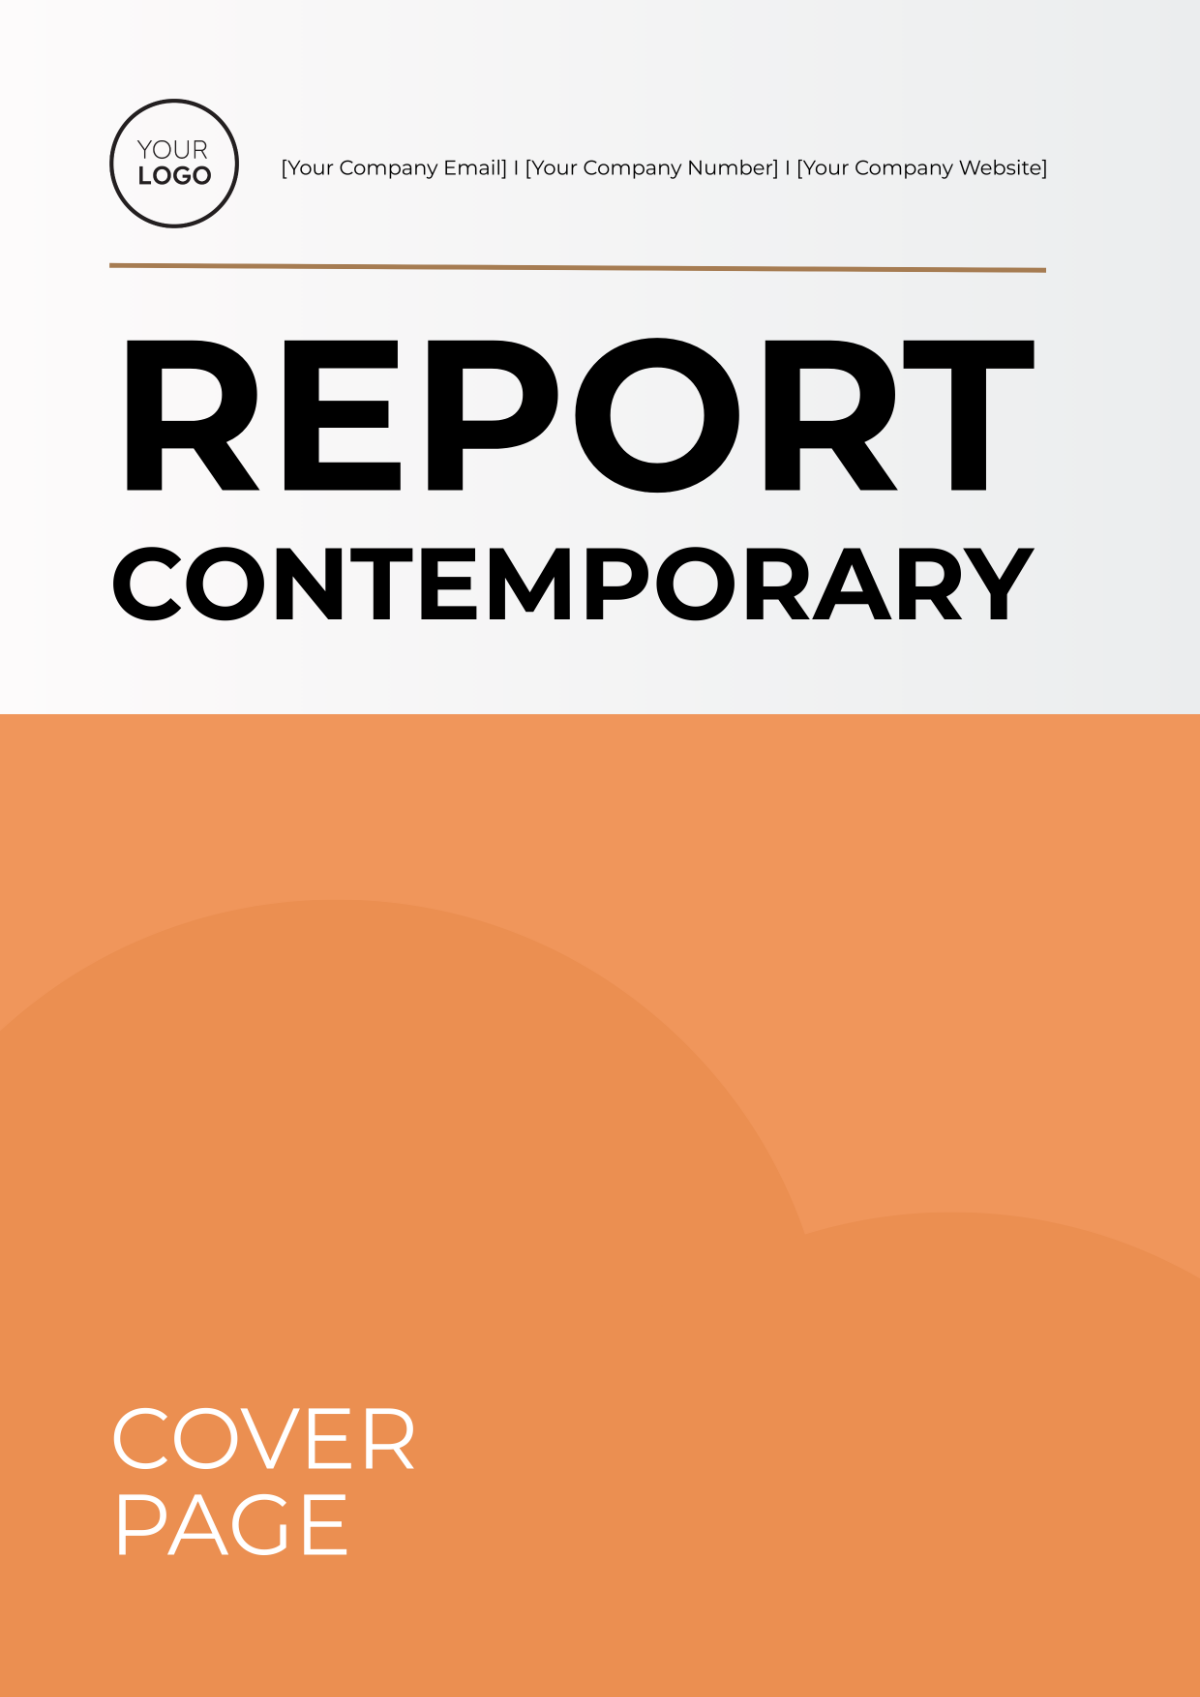 Report Contemporary Cover Page